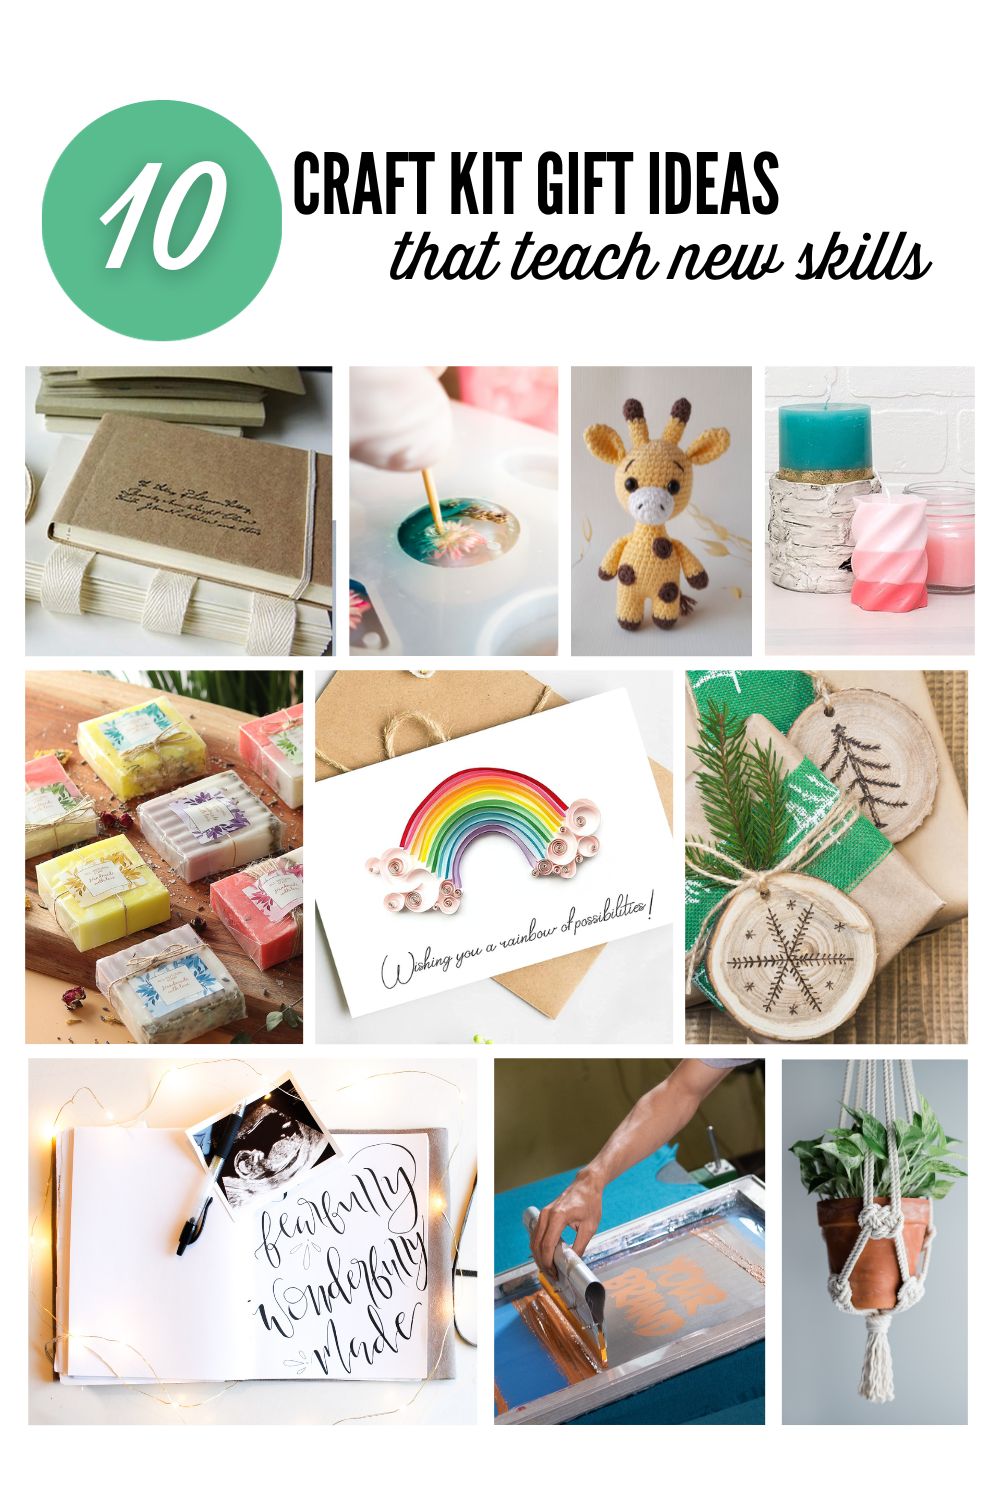 These 10 craft kits are great for new teens and adults to learn a new skill. My family loves to make gifts for others with these fun kits. 